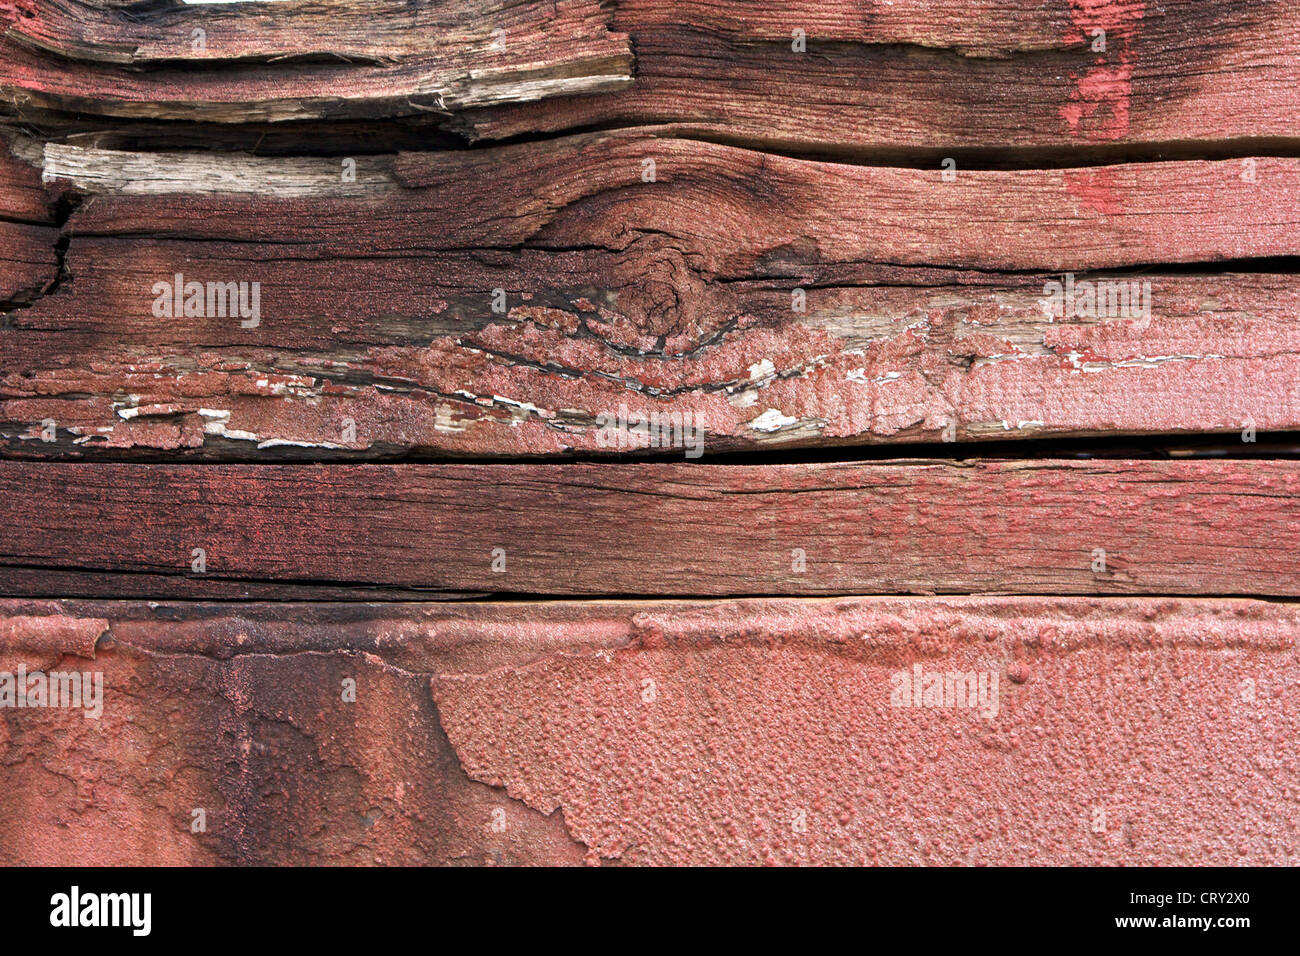 Stacked wooden beams with faint, flaking red paint at an industrial facility. Stock Photo